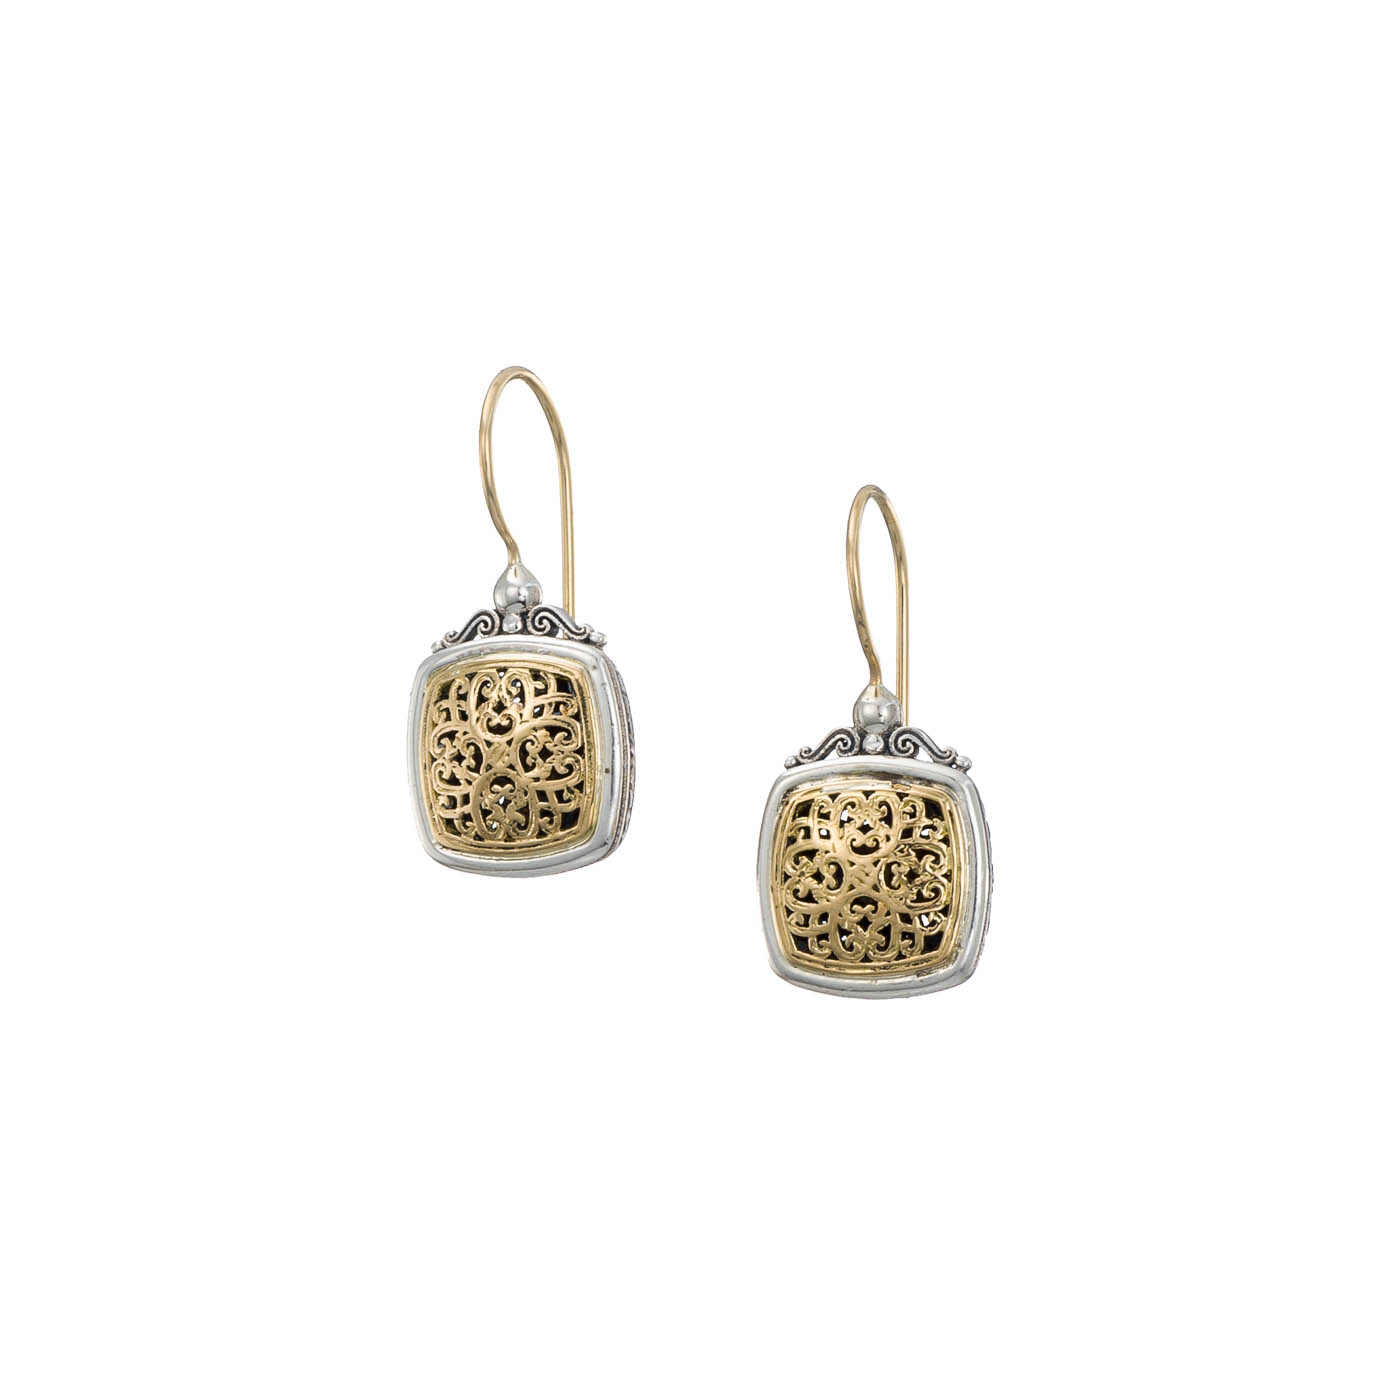 Mediterranean small square earrings in 18K Gold and Sterling Silver